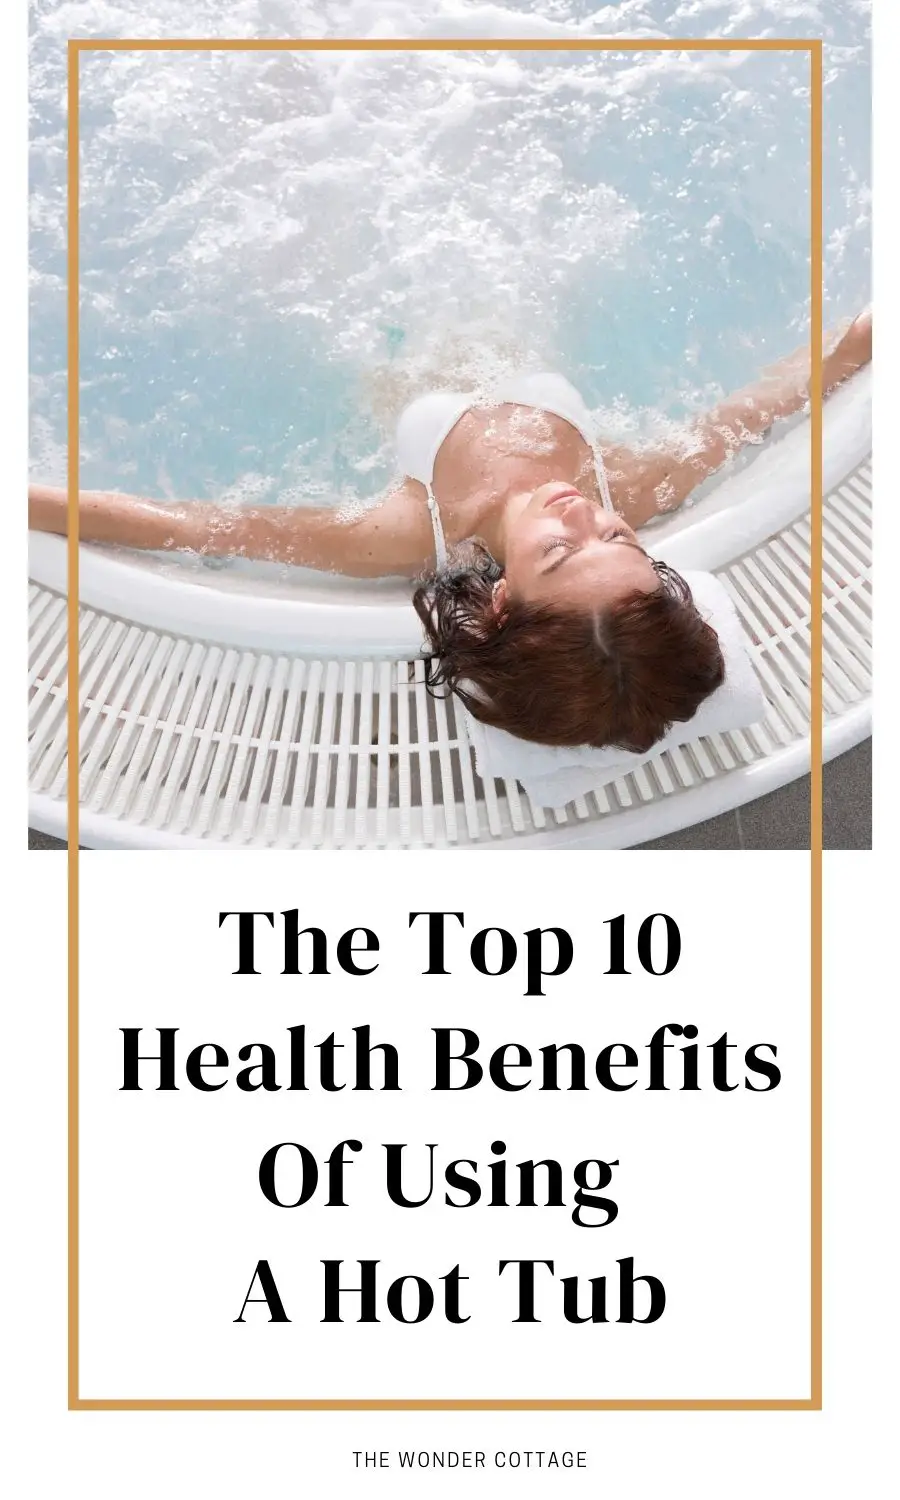 The Top 10 Health Benefits Of Using A Hot Tub